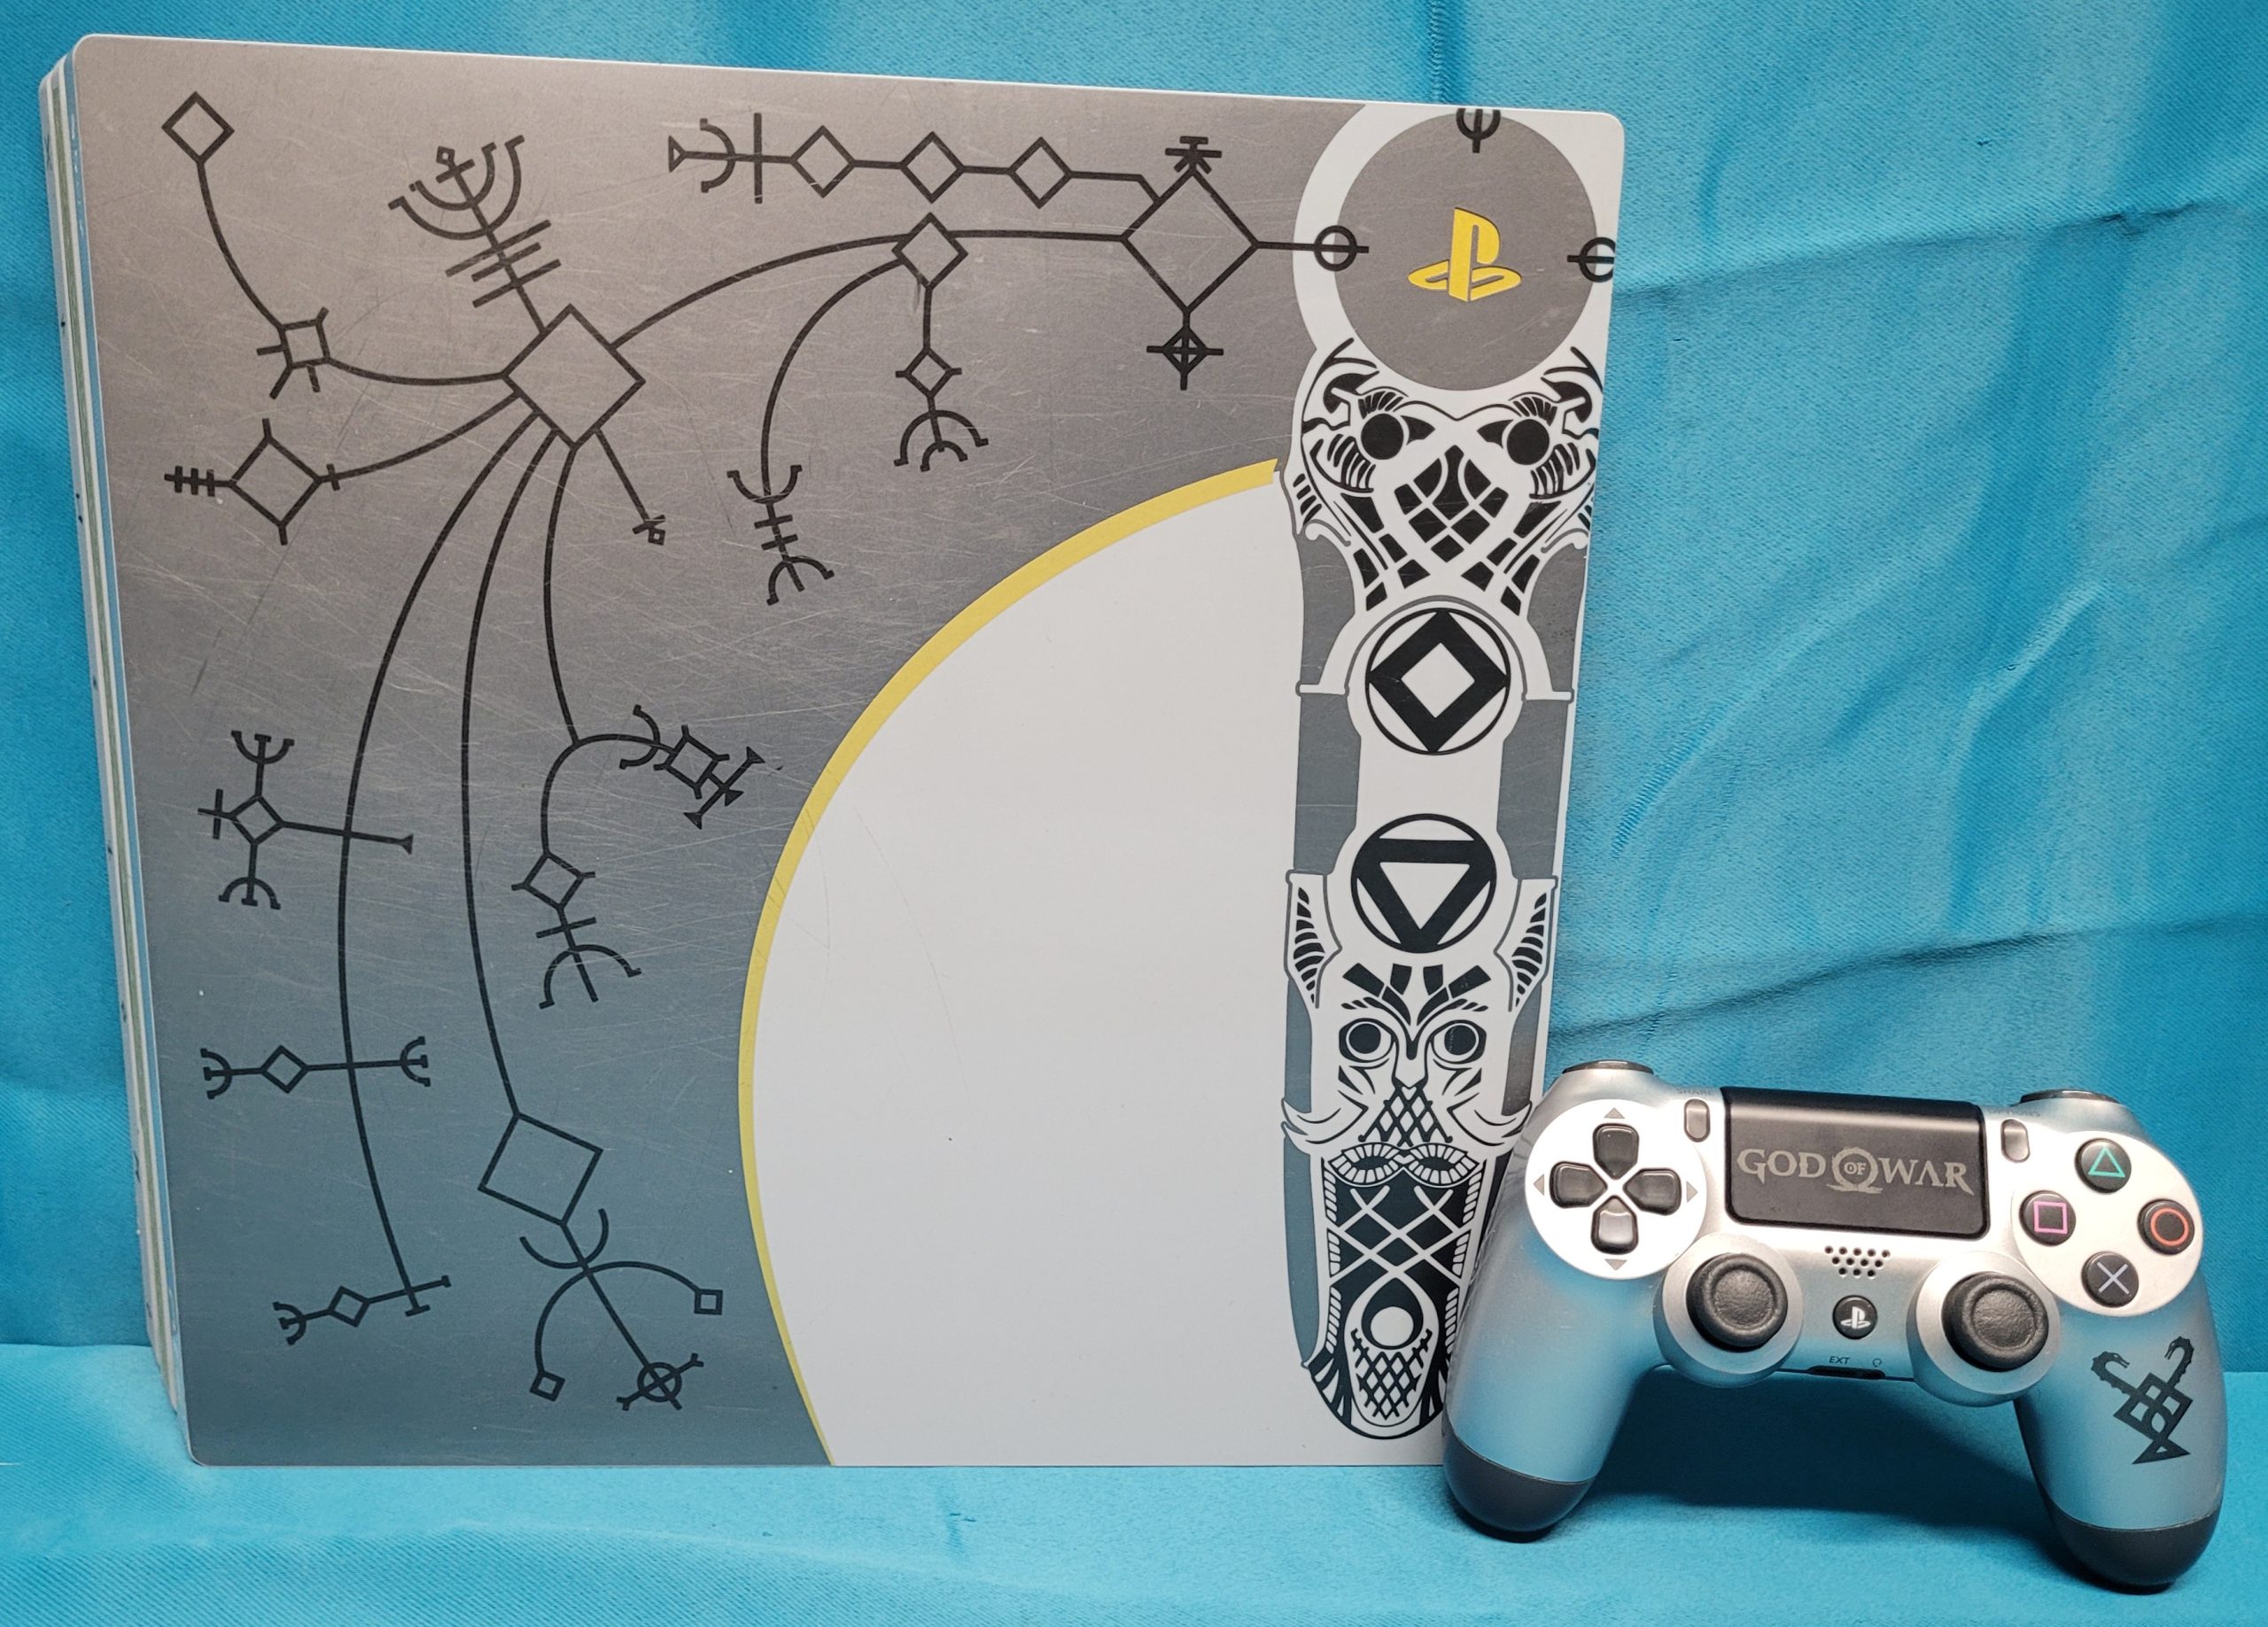 SONY PlayStation 4 Pro 1TB Limited Edition Console (God of War